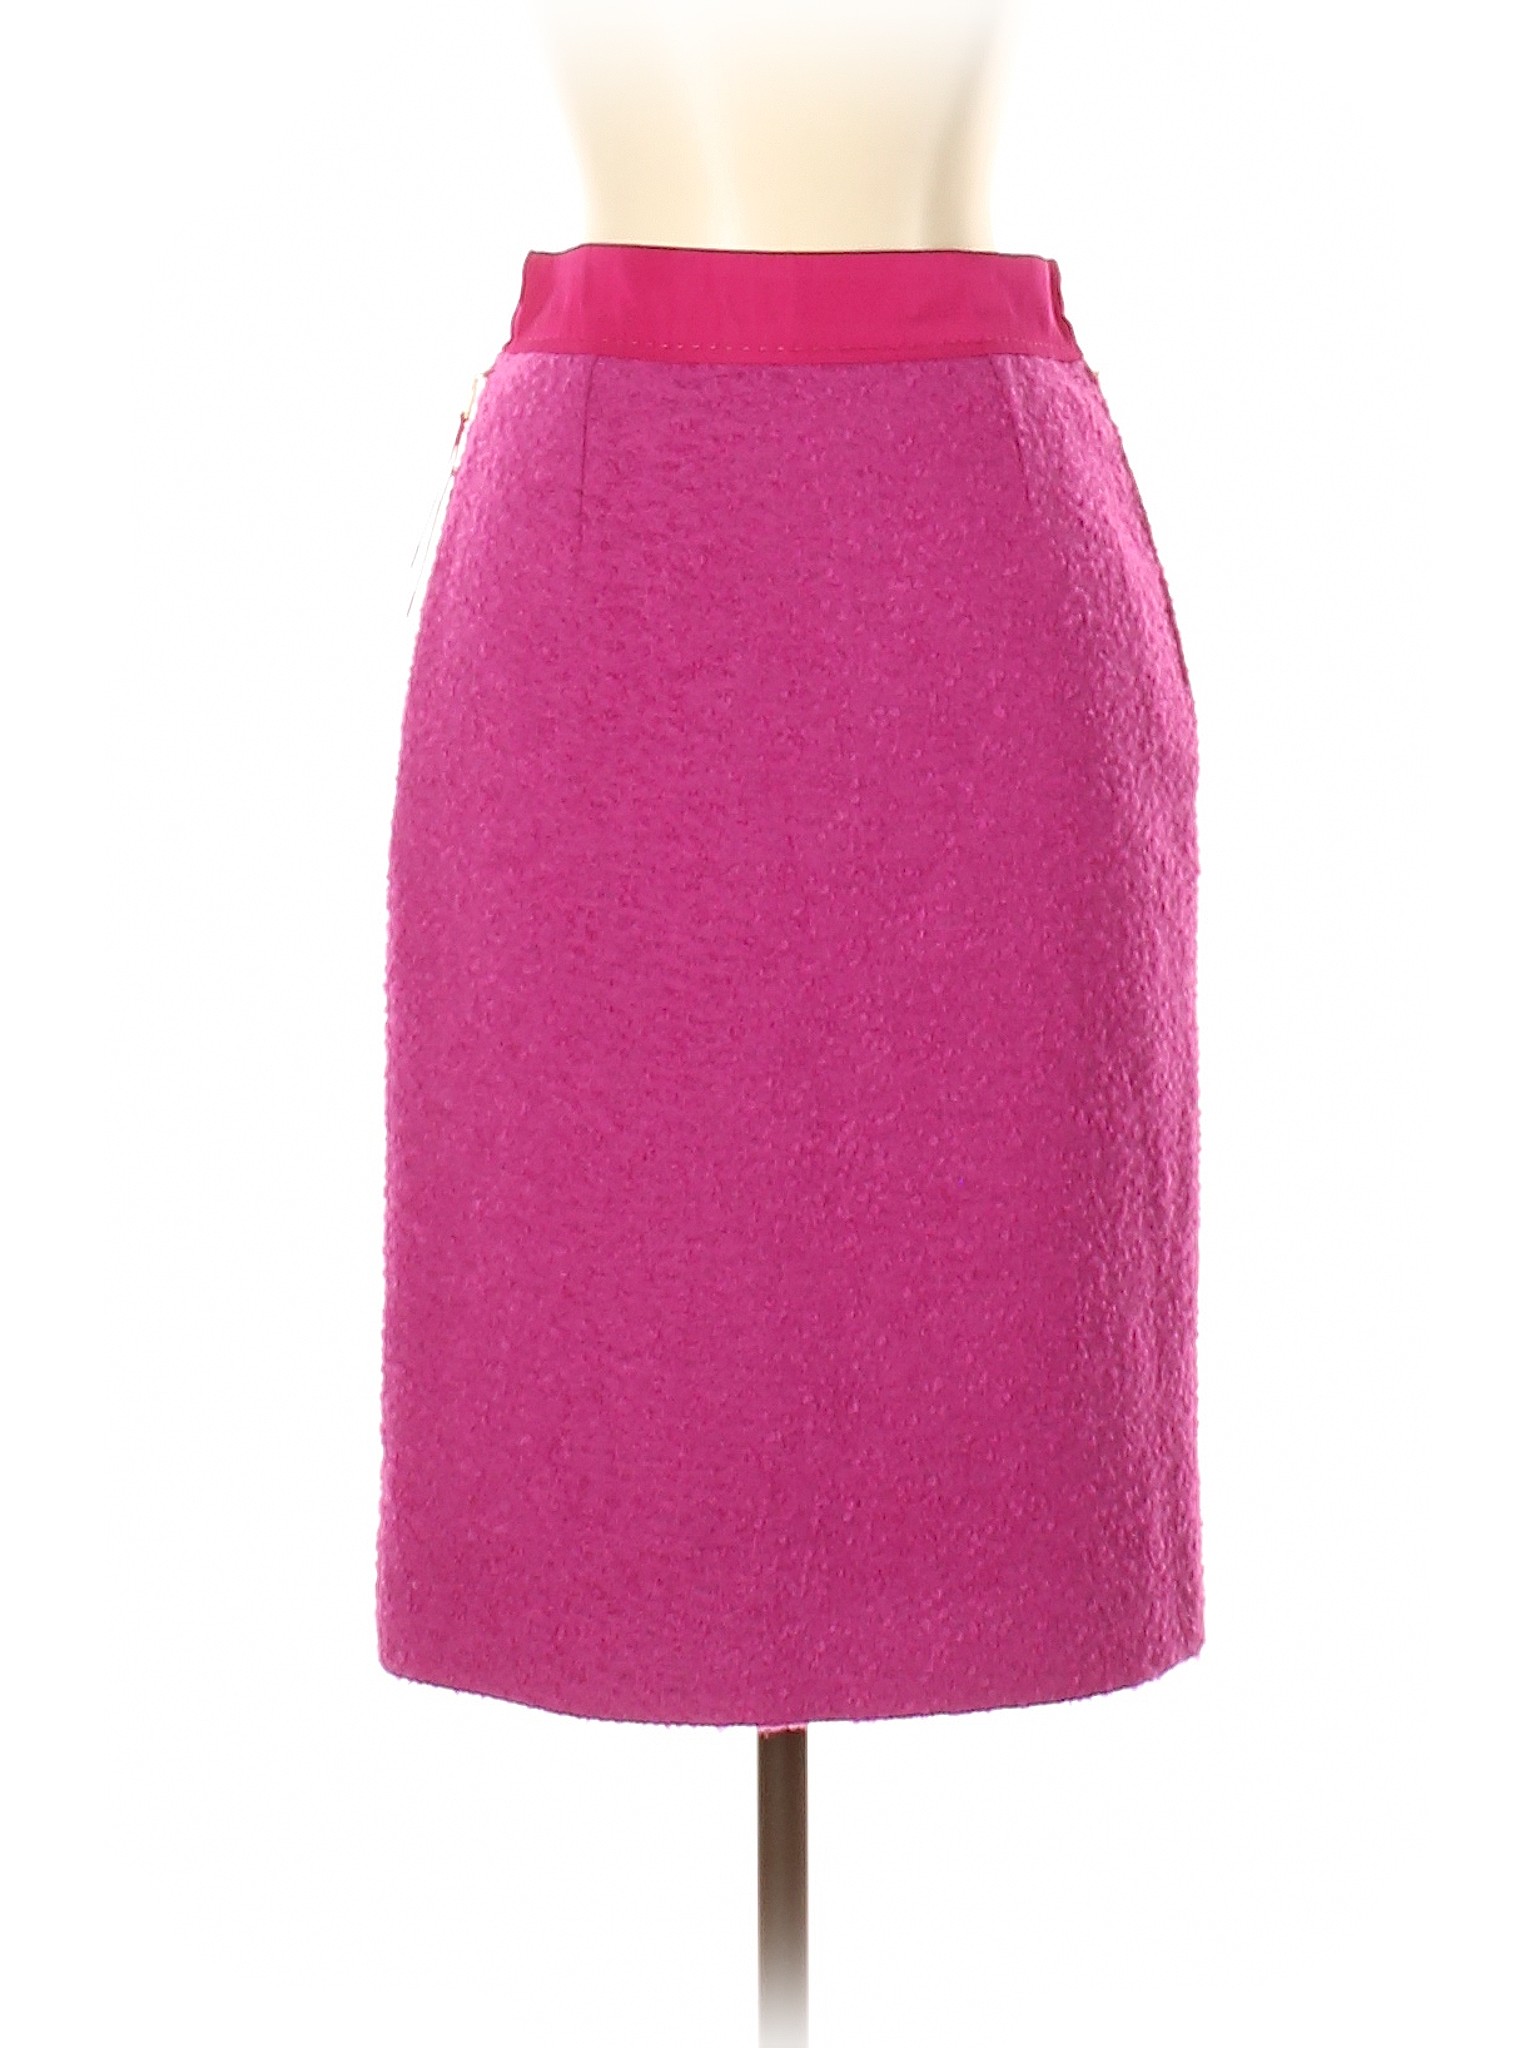 Louis Vuitton Solid Color Block Pink Wool Skirt Size 36 (FR) - 92% off ...